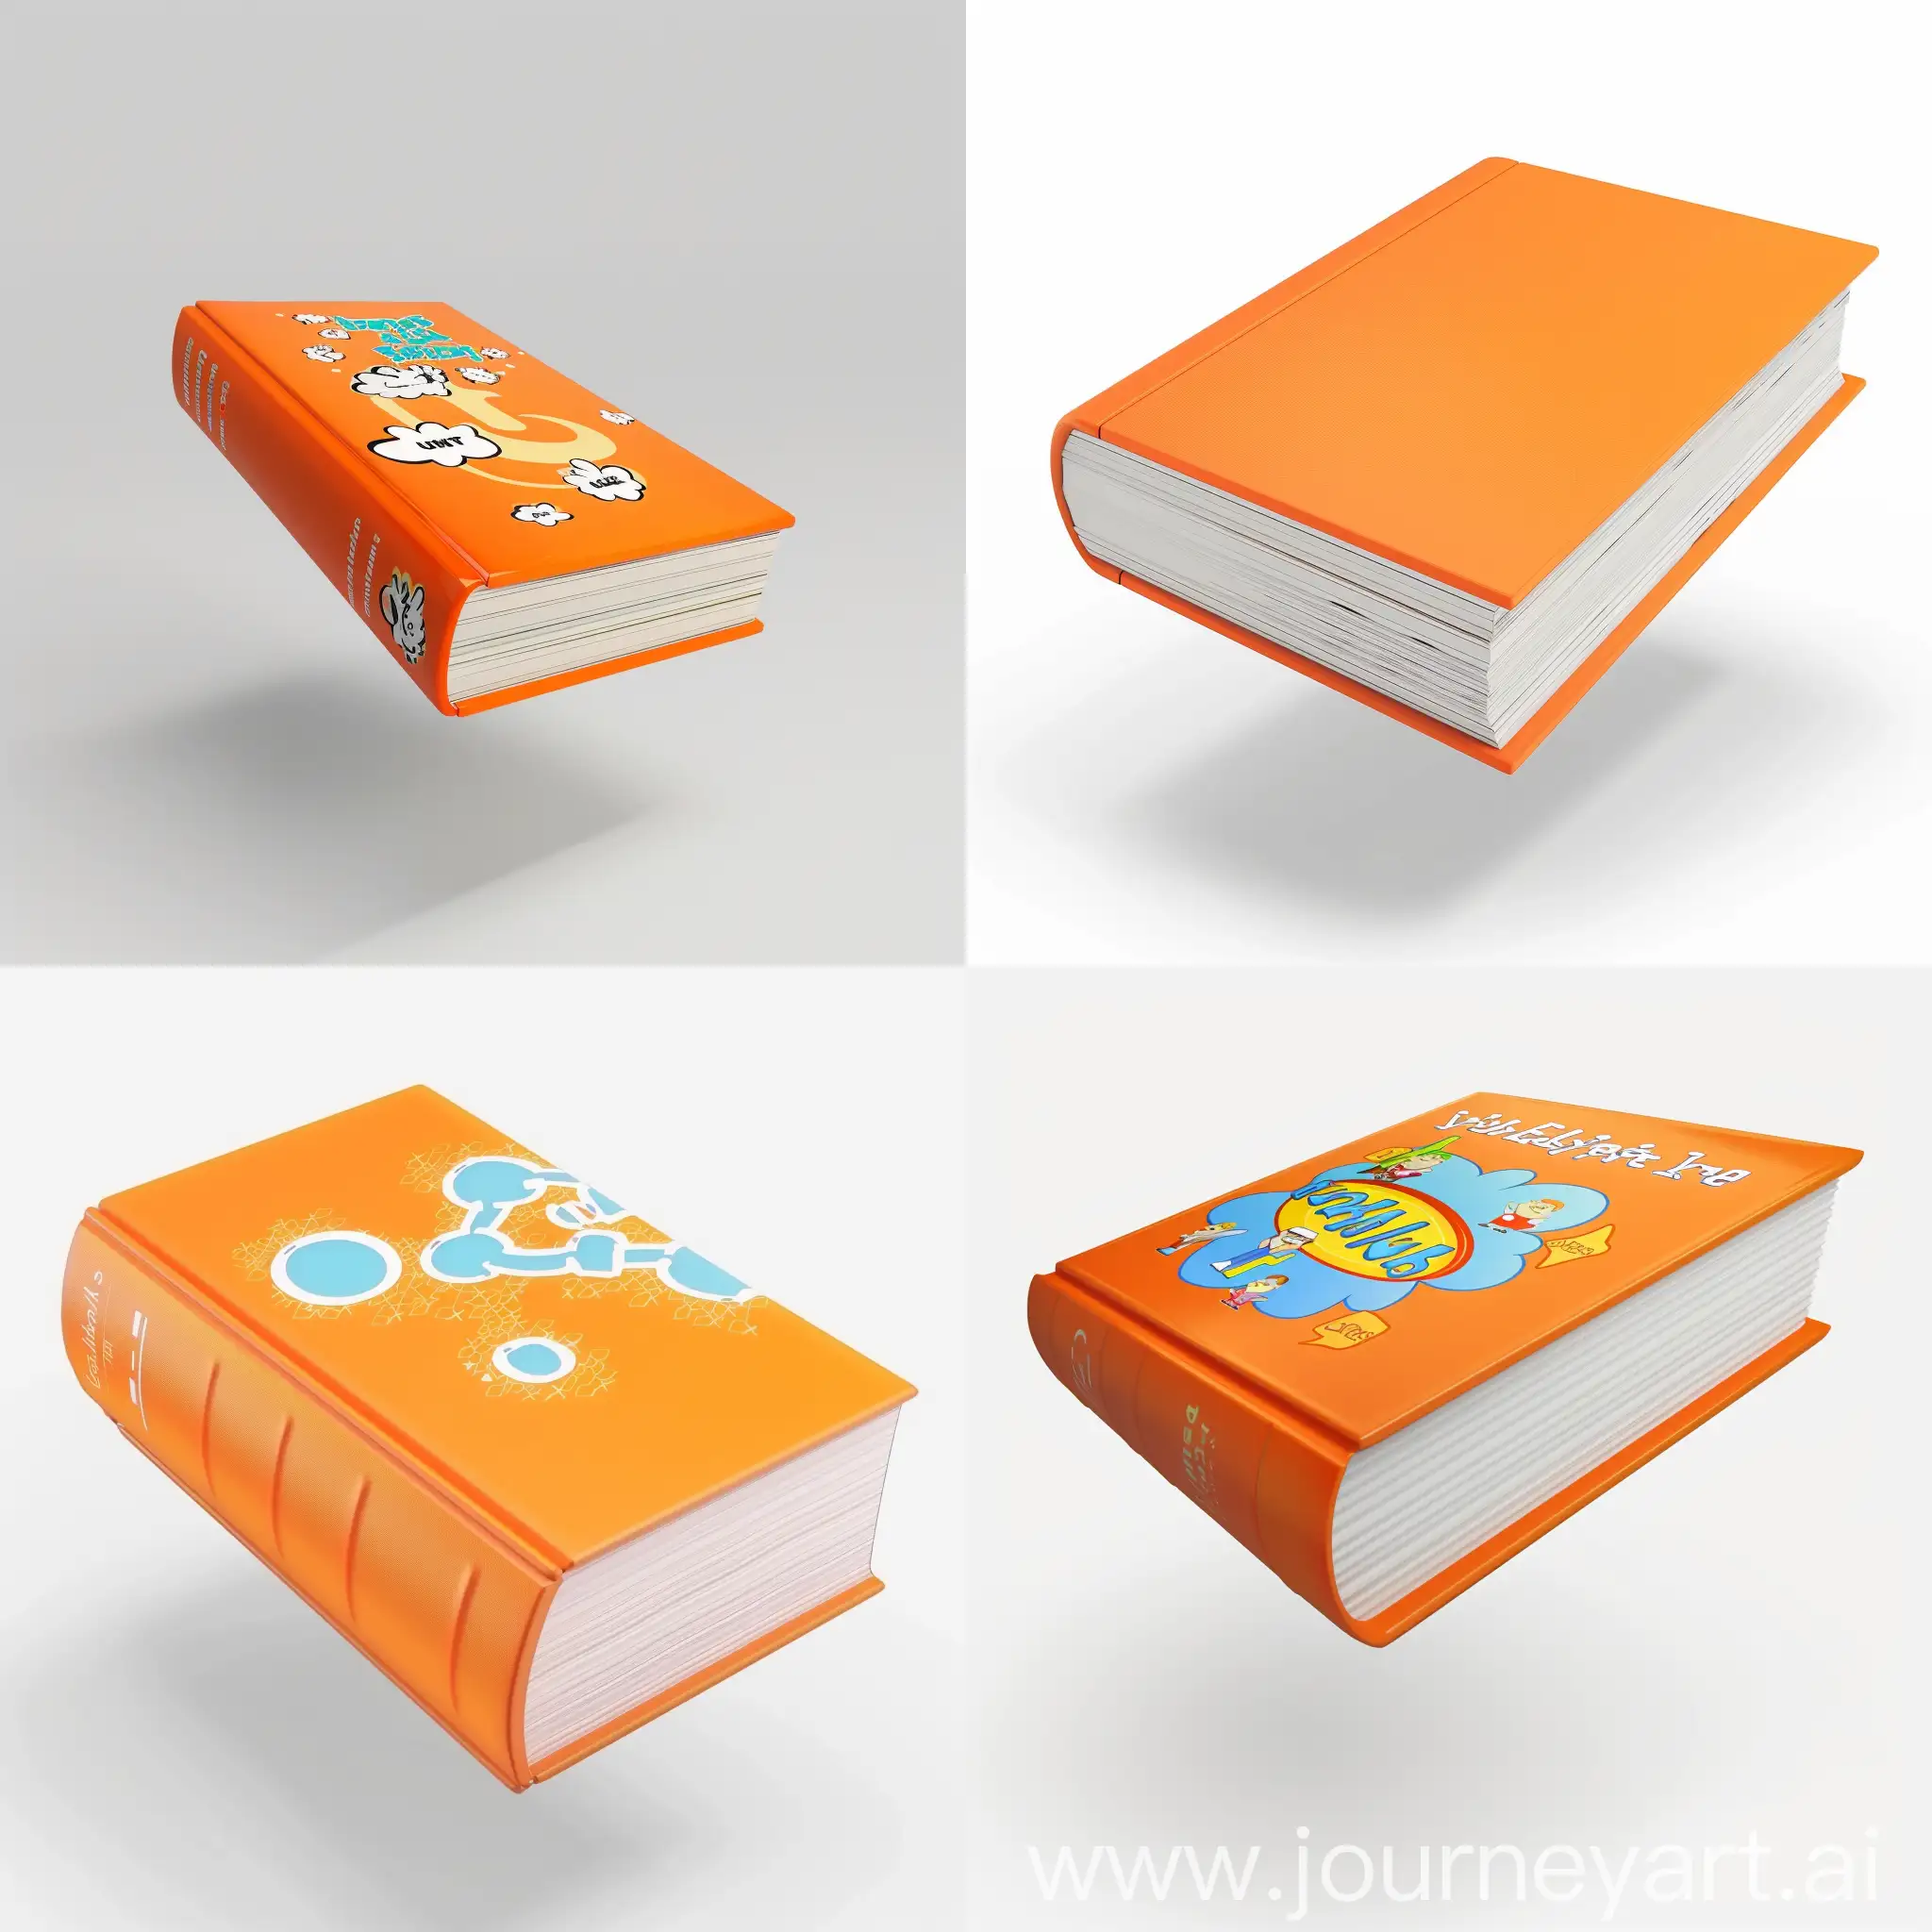 3D rendered book, floating, orange cover, cartoons style, clean white background